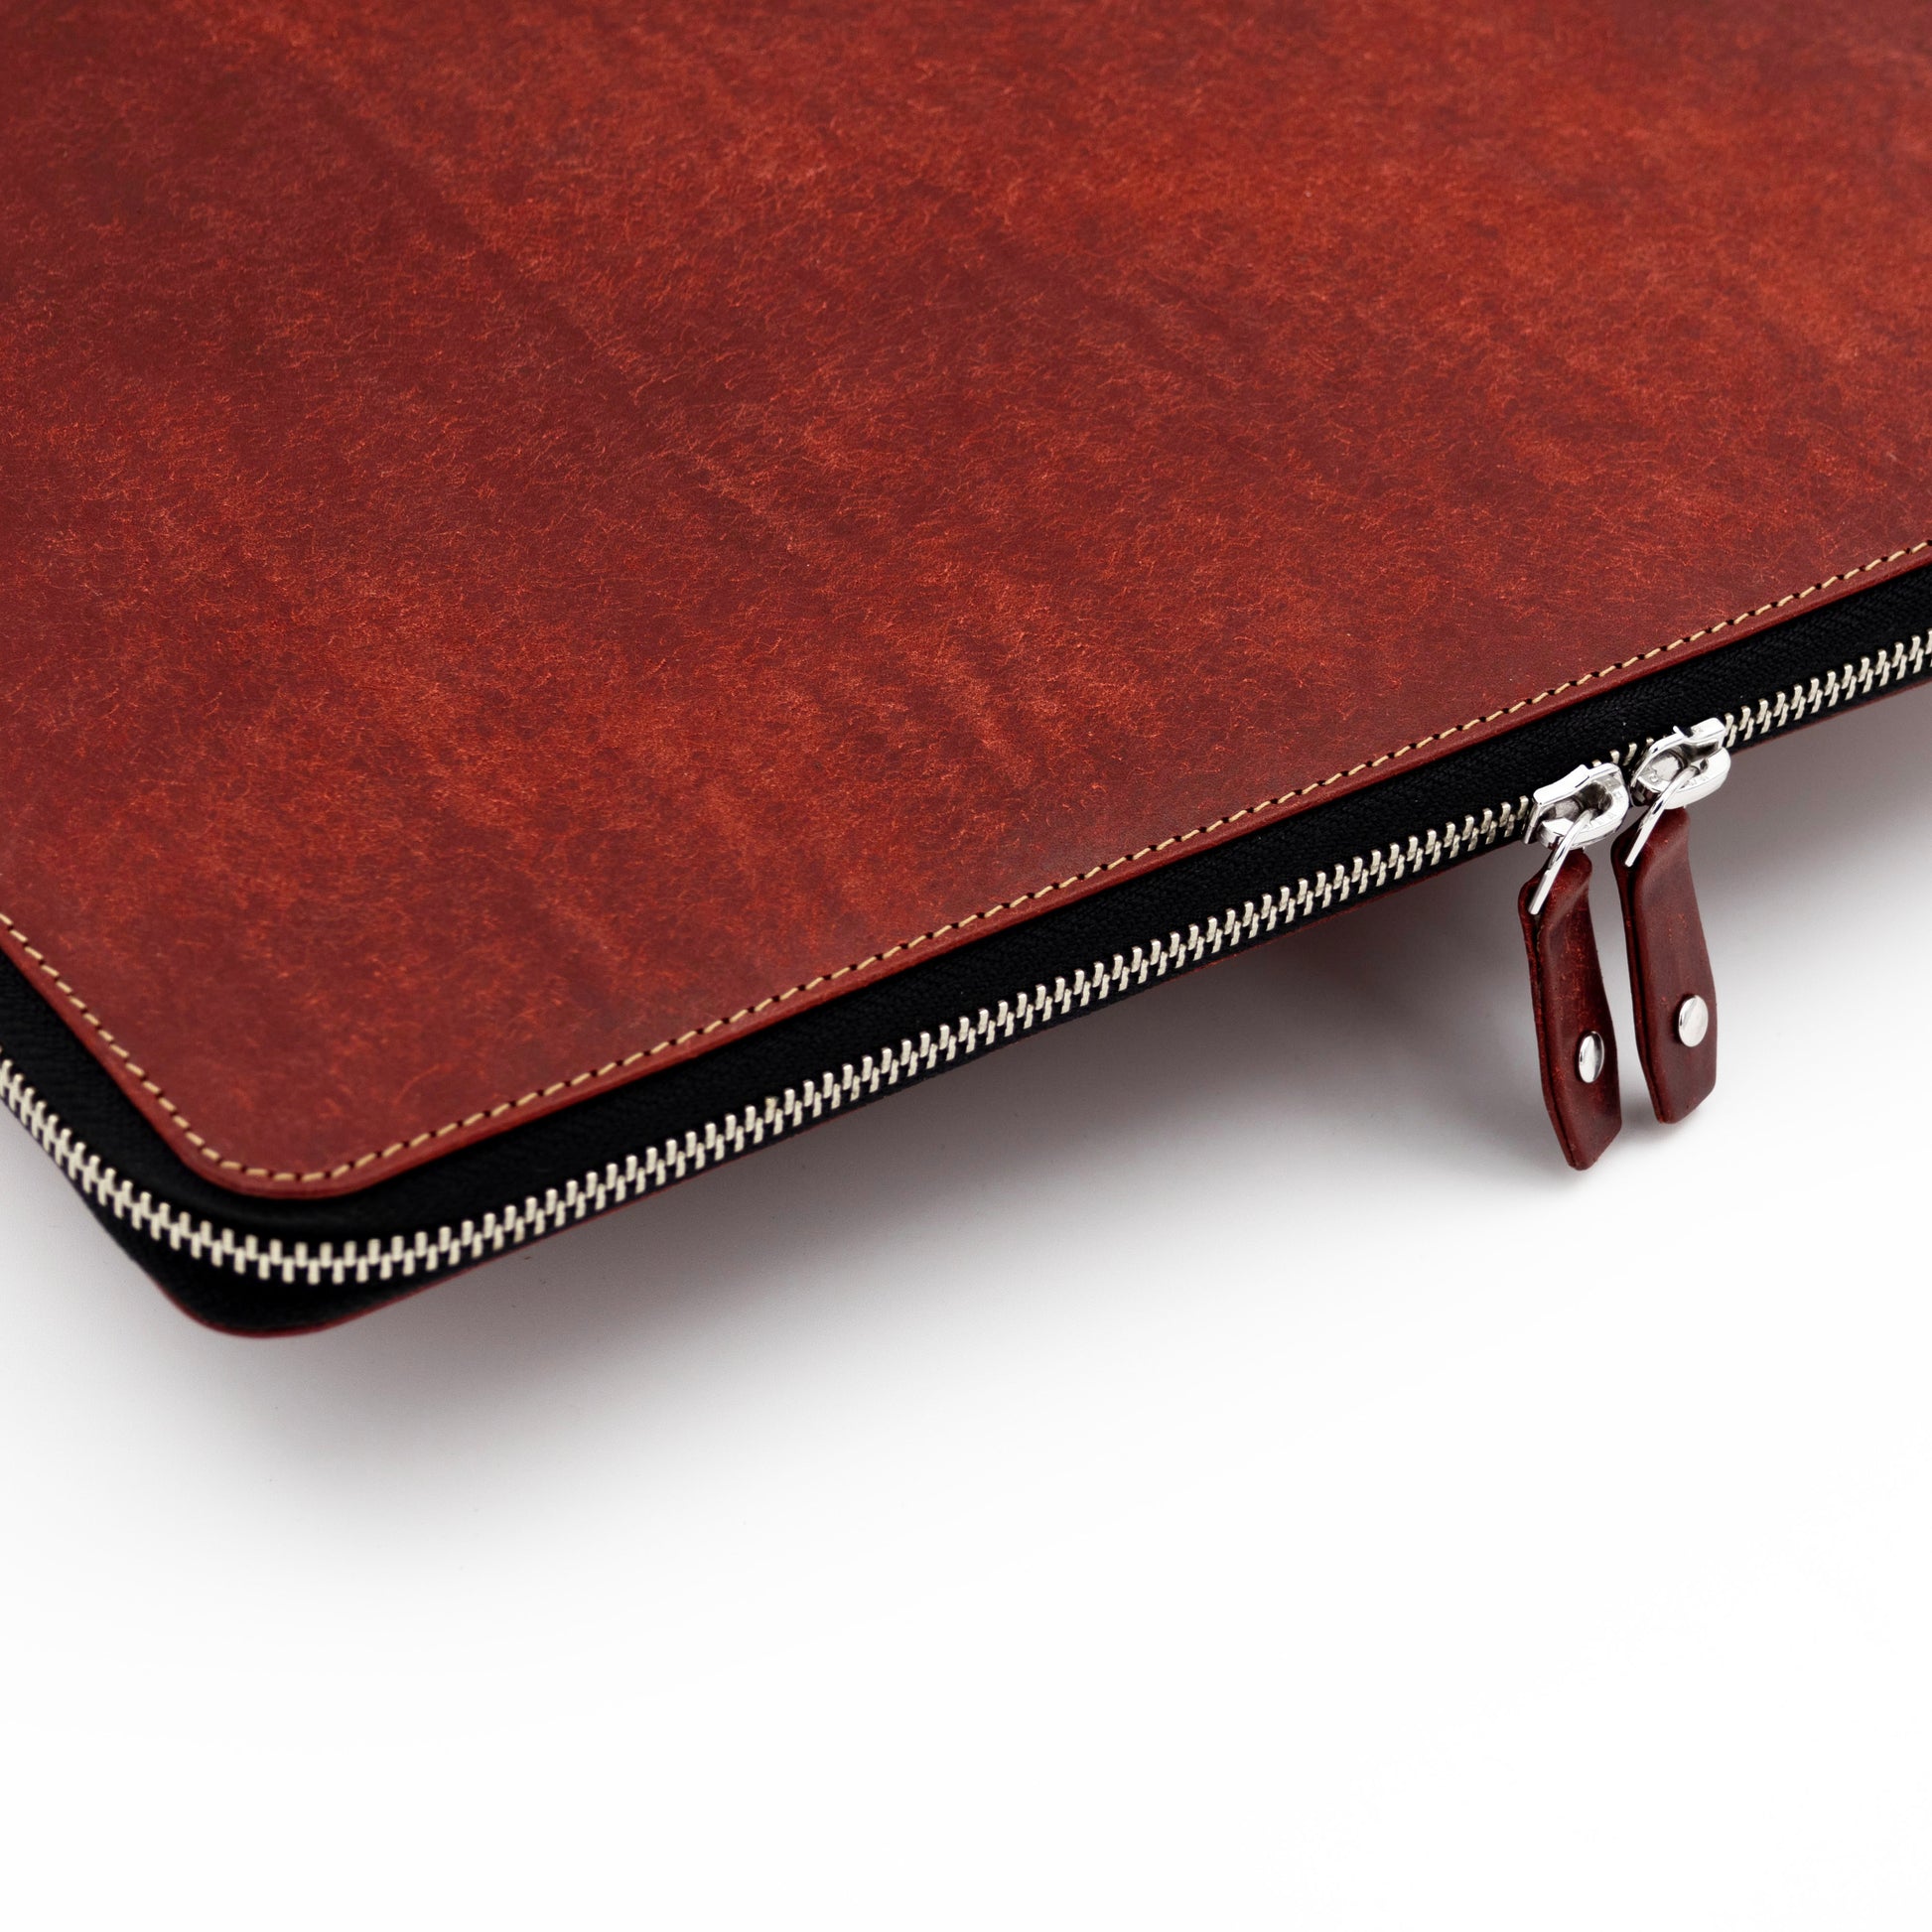 A Leather Laptop Case that can carry the Surface Pro 10 device